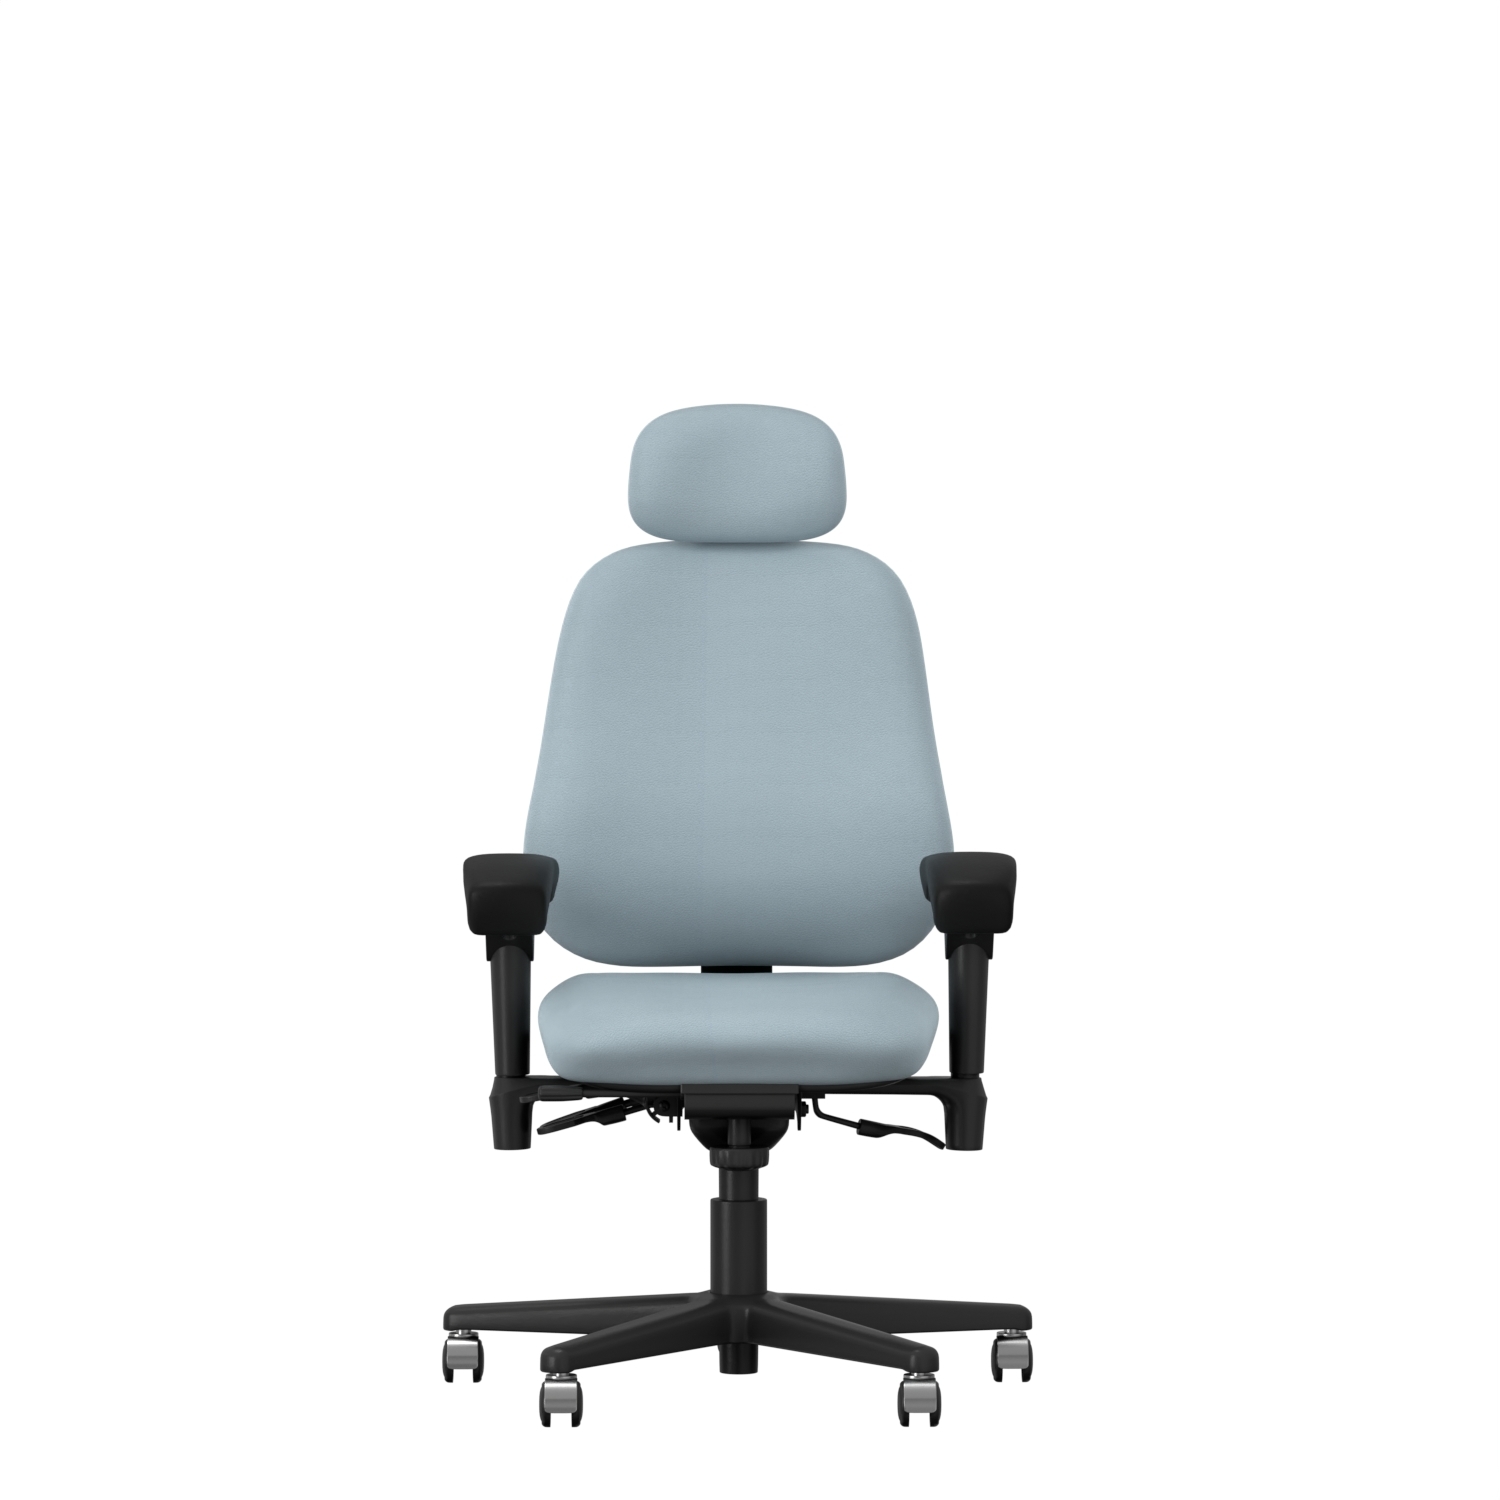 NEXT24 3400 – Intensive Use Series Chair